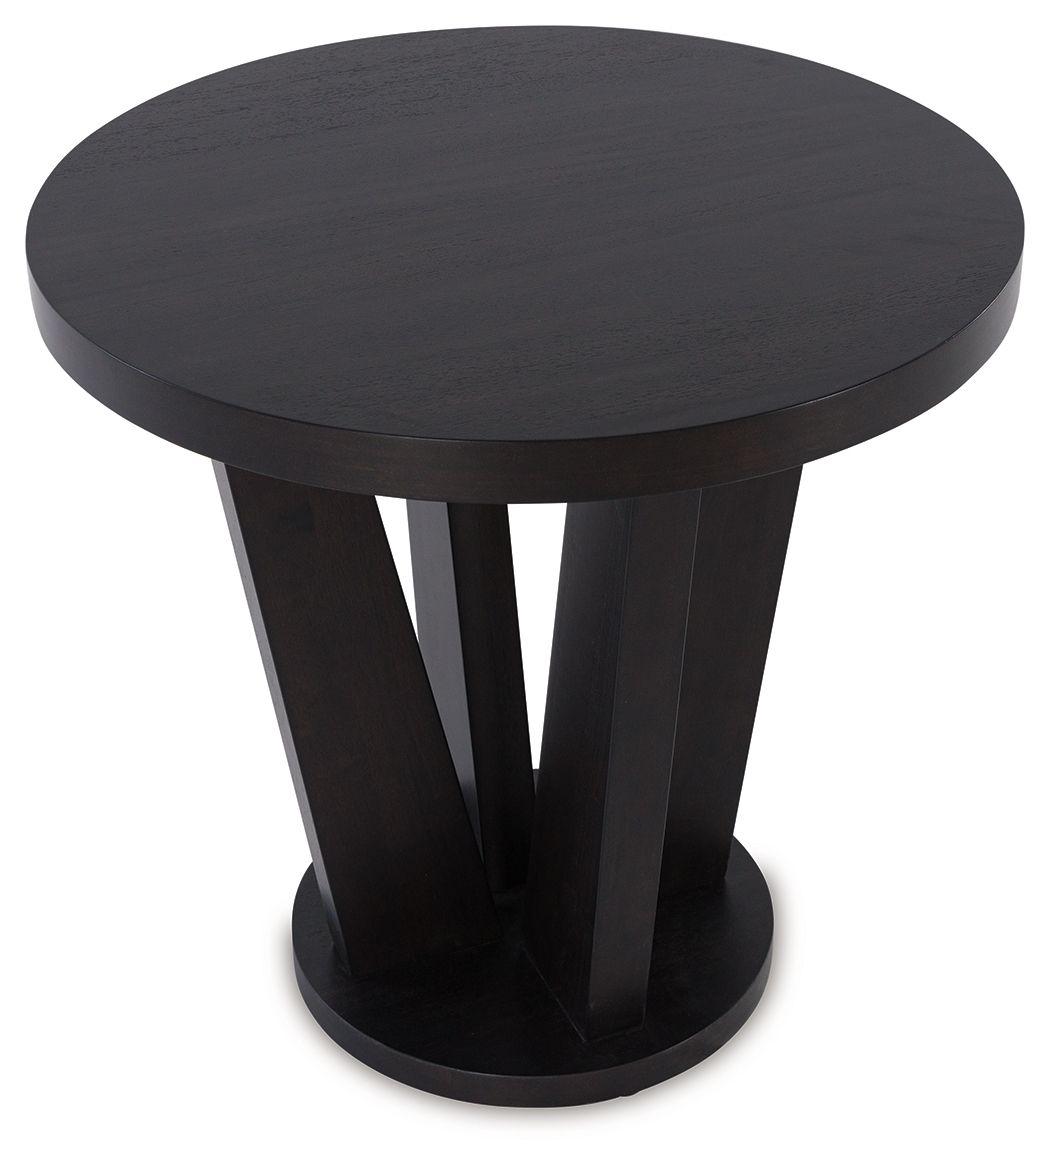 Chasinfield - Dark Brown - Round End Table - Tony's Home Furnishings